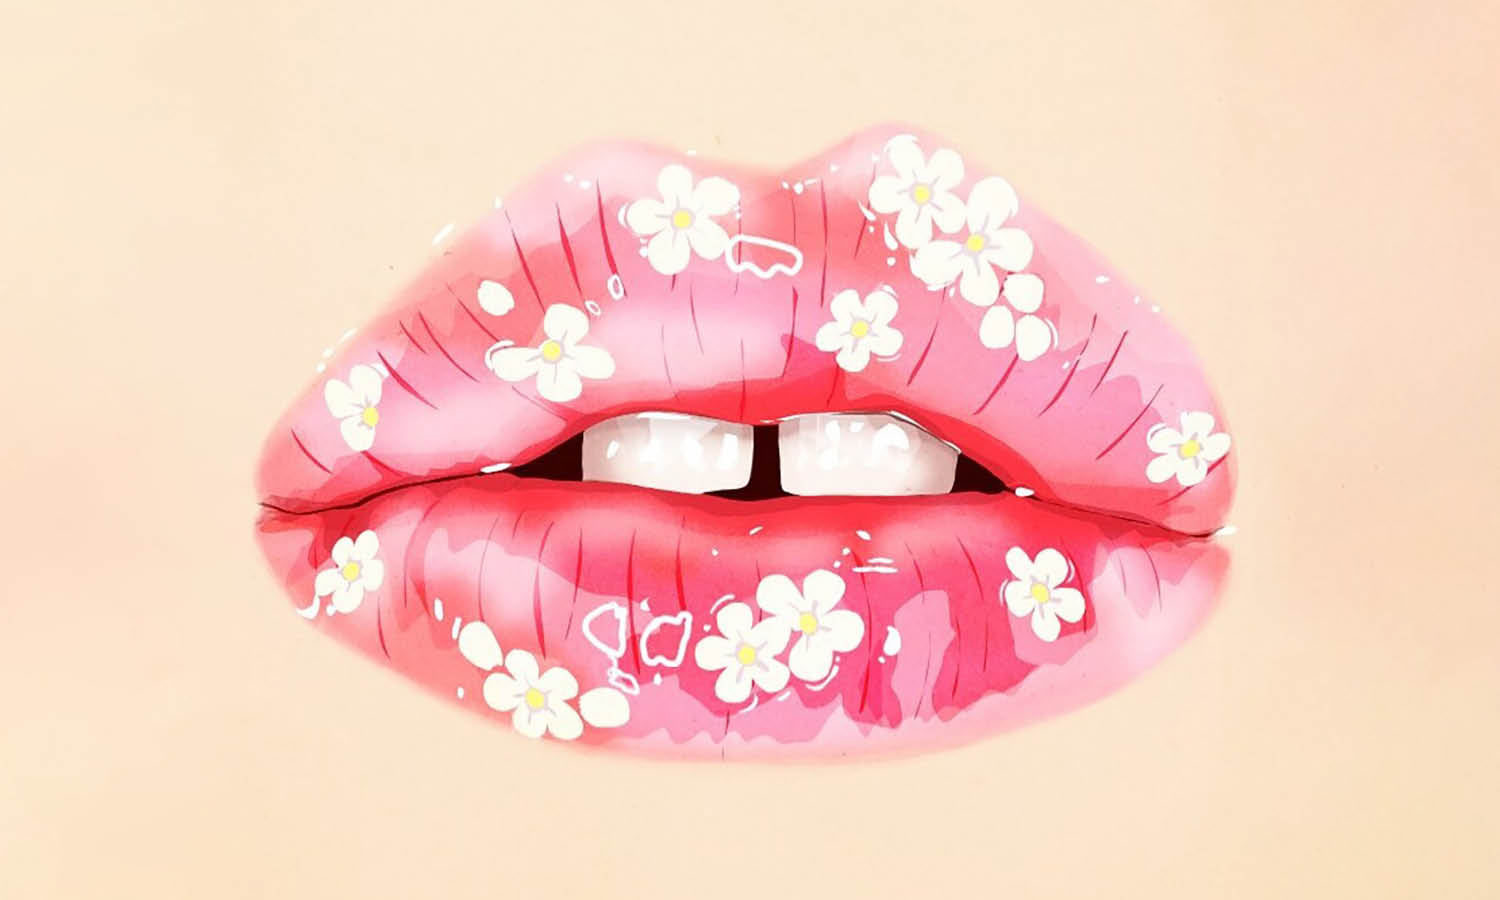 30 Best Lips Illustration Ideas You Should Check